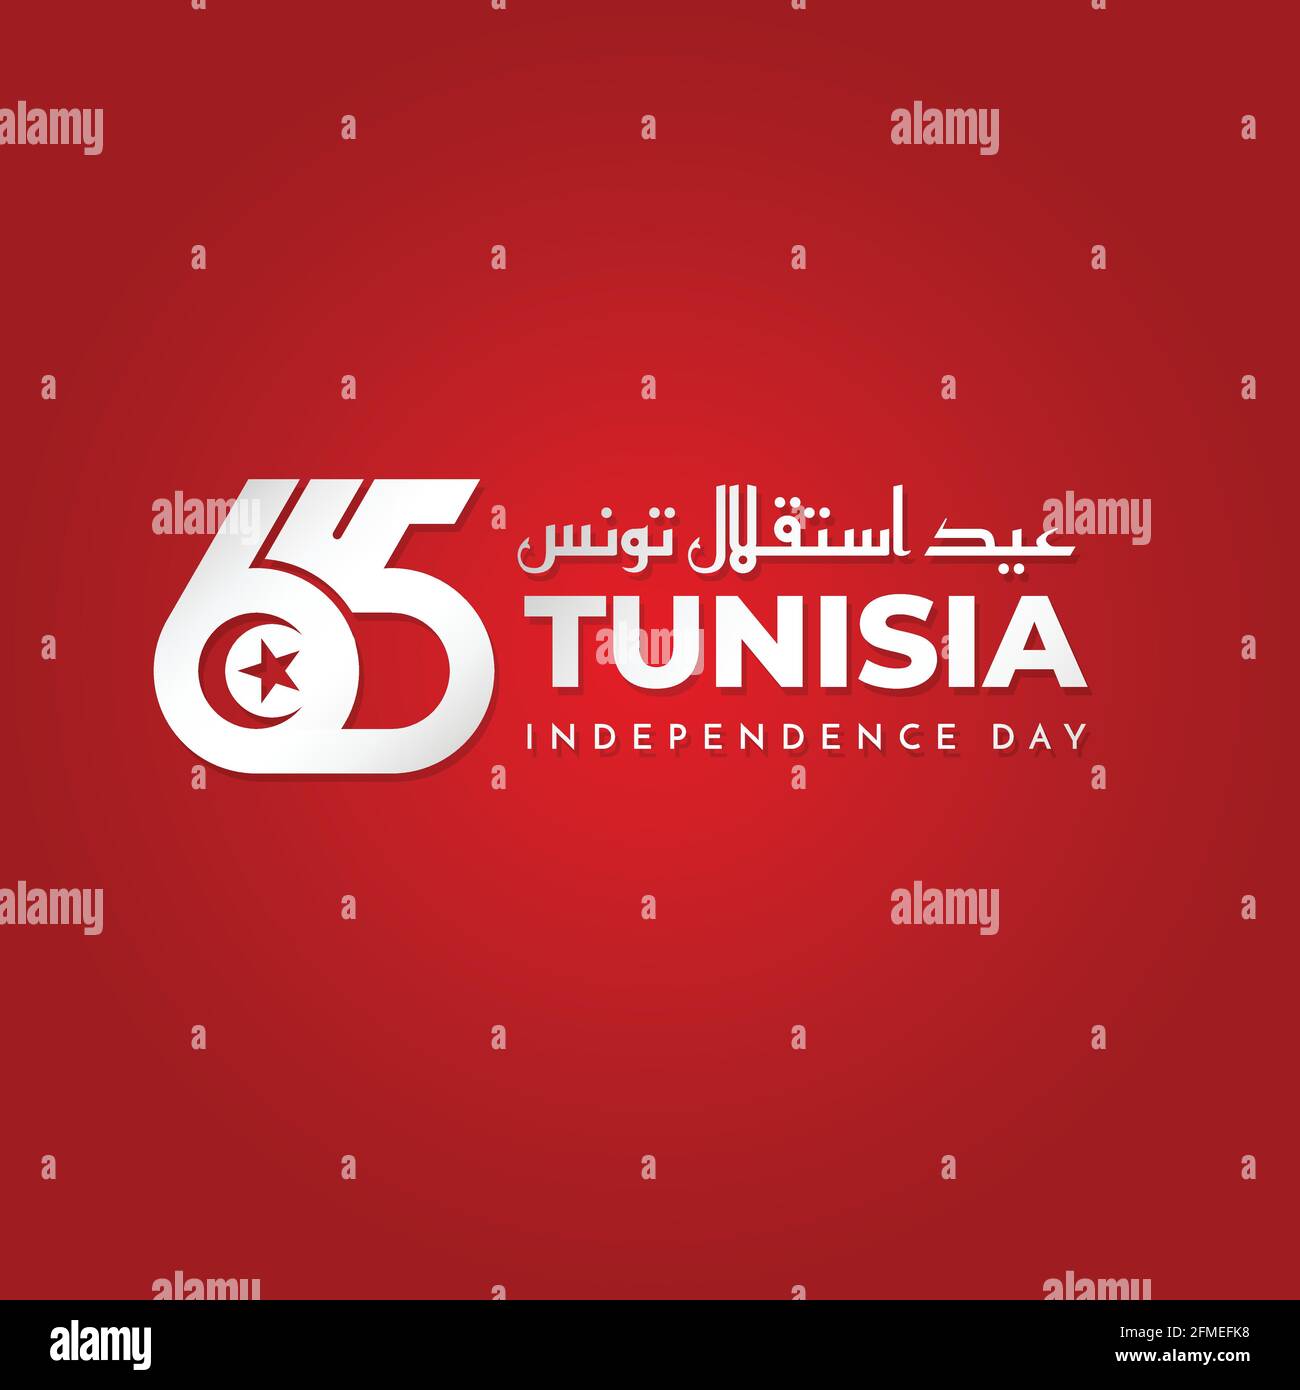 65th Tunisia Independence Day design. typography number of 65. Arabic text mean is Tunisia Independence day. Stock Vector